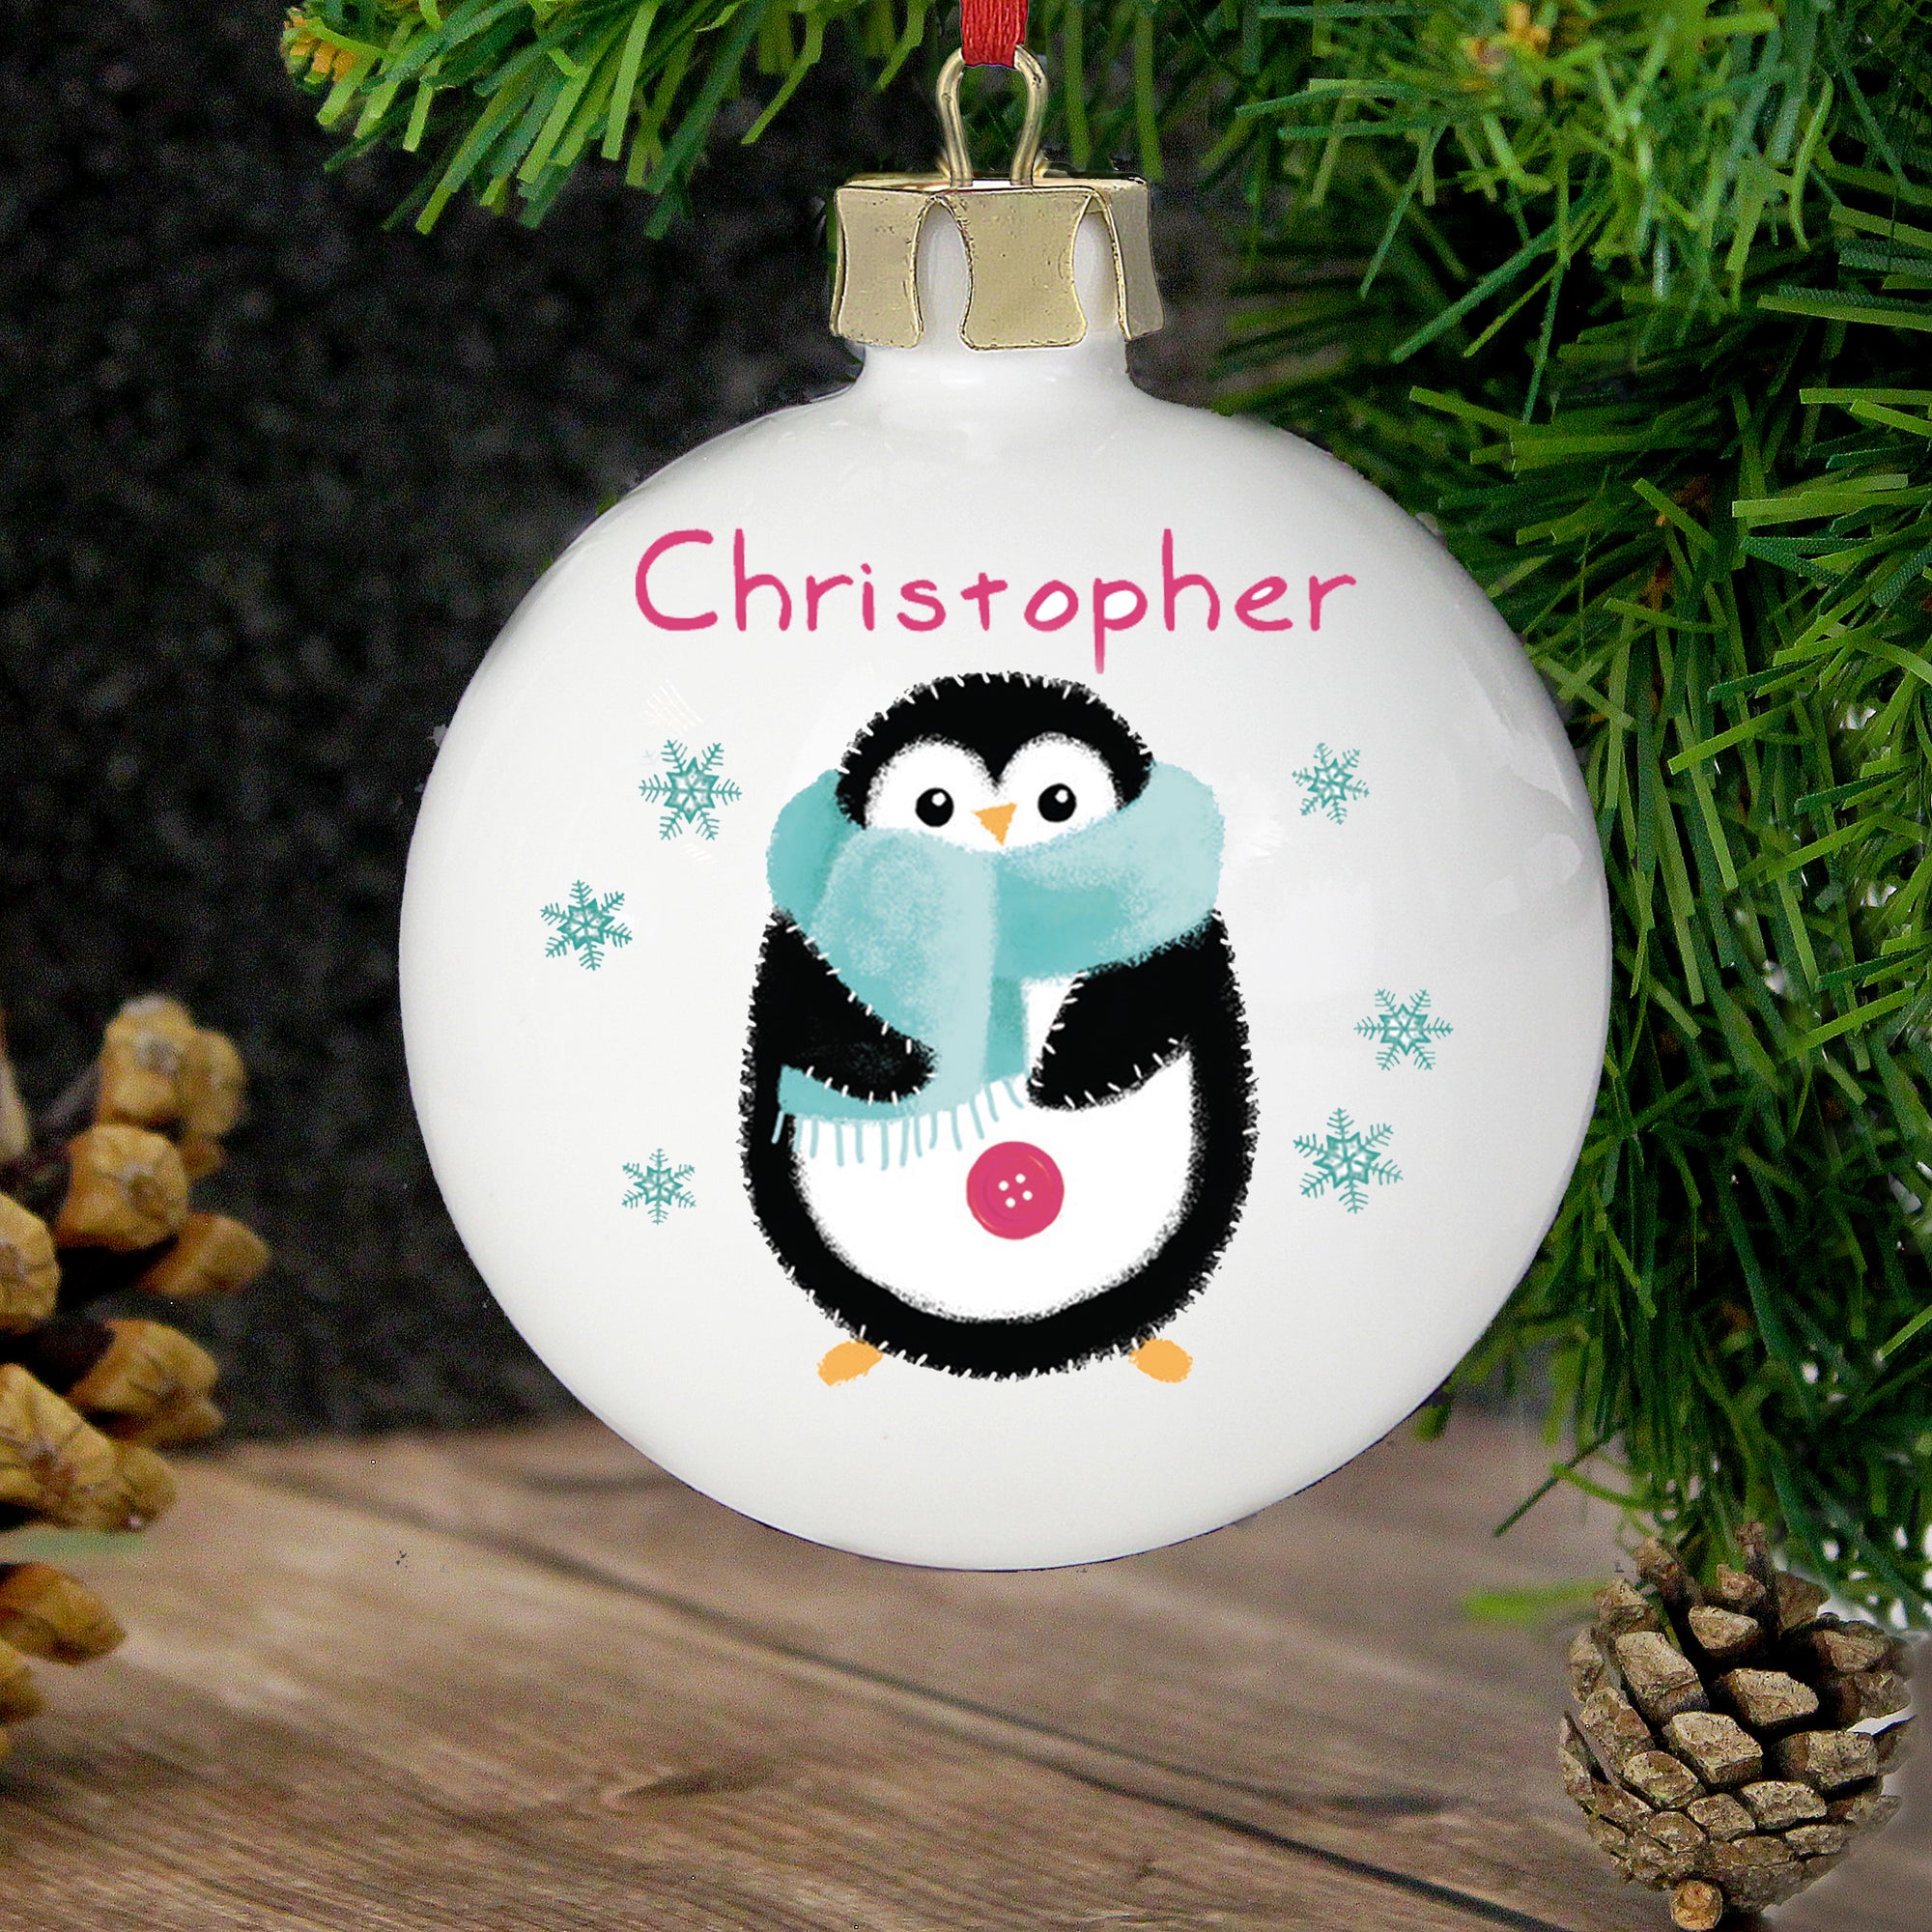 Personalised white ceramic Christmas tree bauble with an illlustration of a hand-drawn penguin on the front wearing a blue scarf and a name of your choice in a red font printed above the penguin. The rear of the bauble can be personalised with your own special message over up to 4 lines.